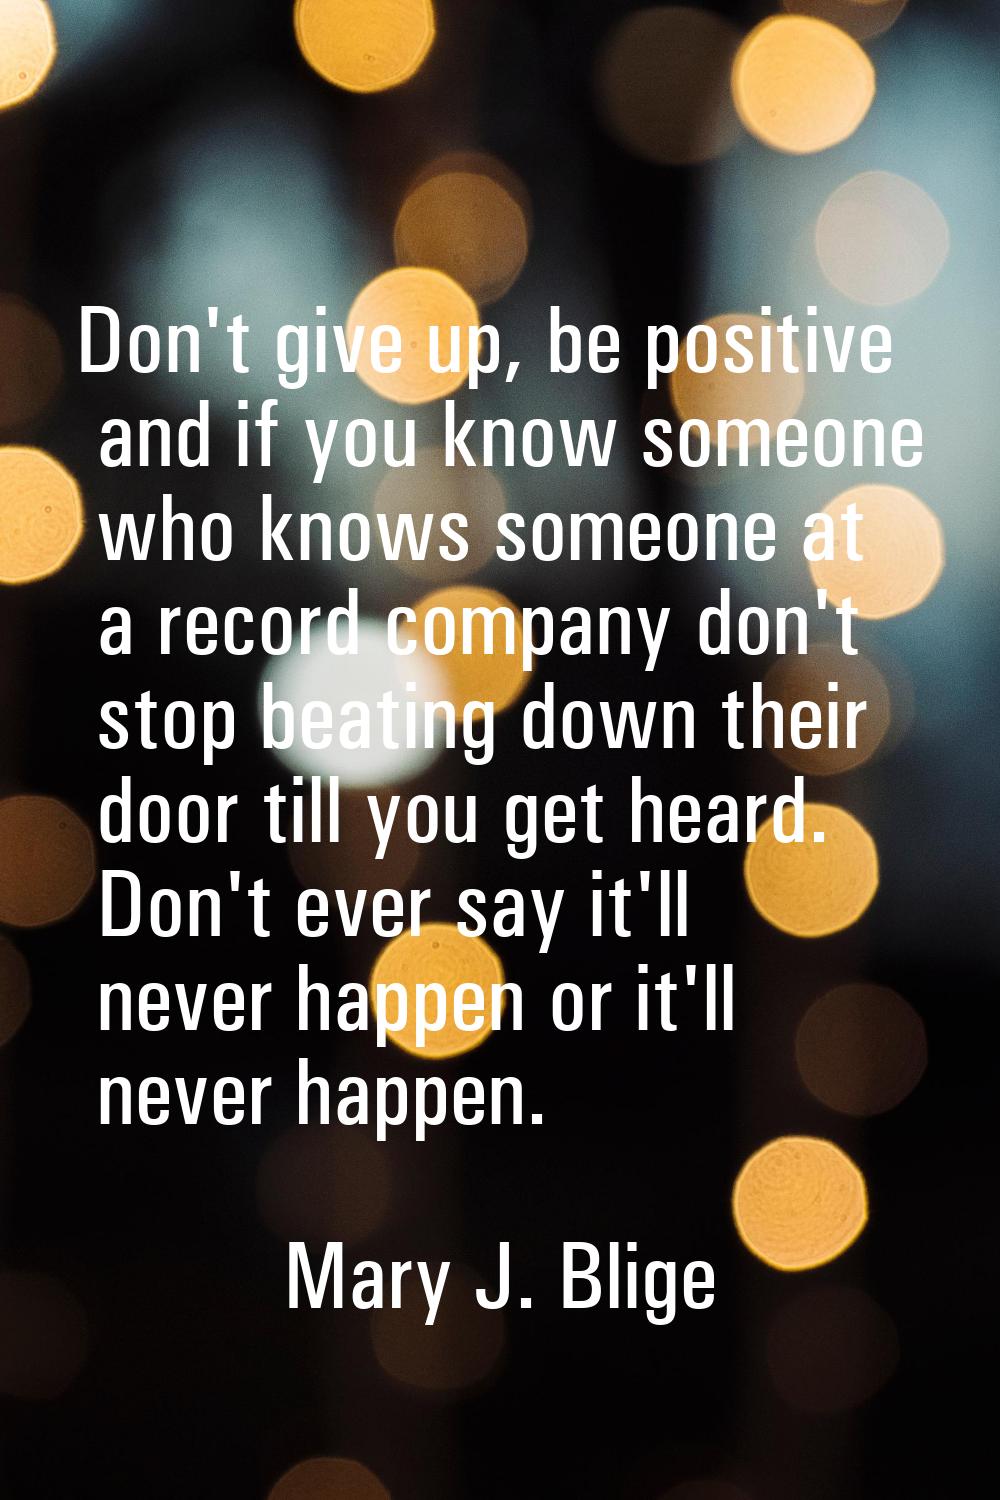 Don't give up, be positive and if you know someone who knows someone at a record company don't stop